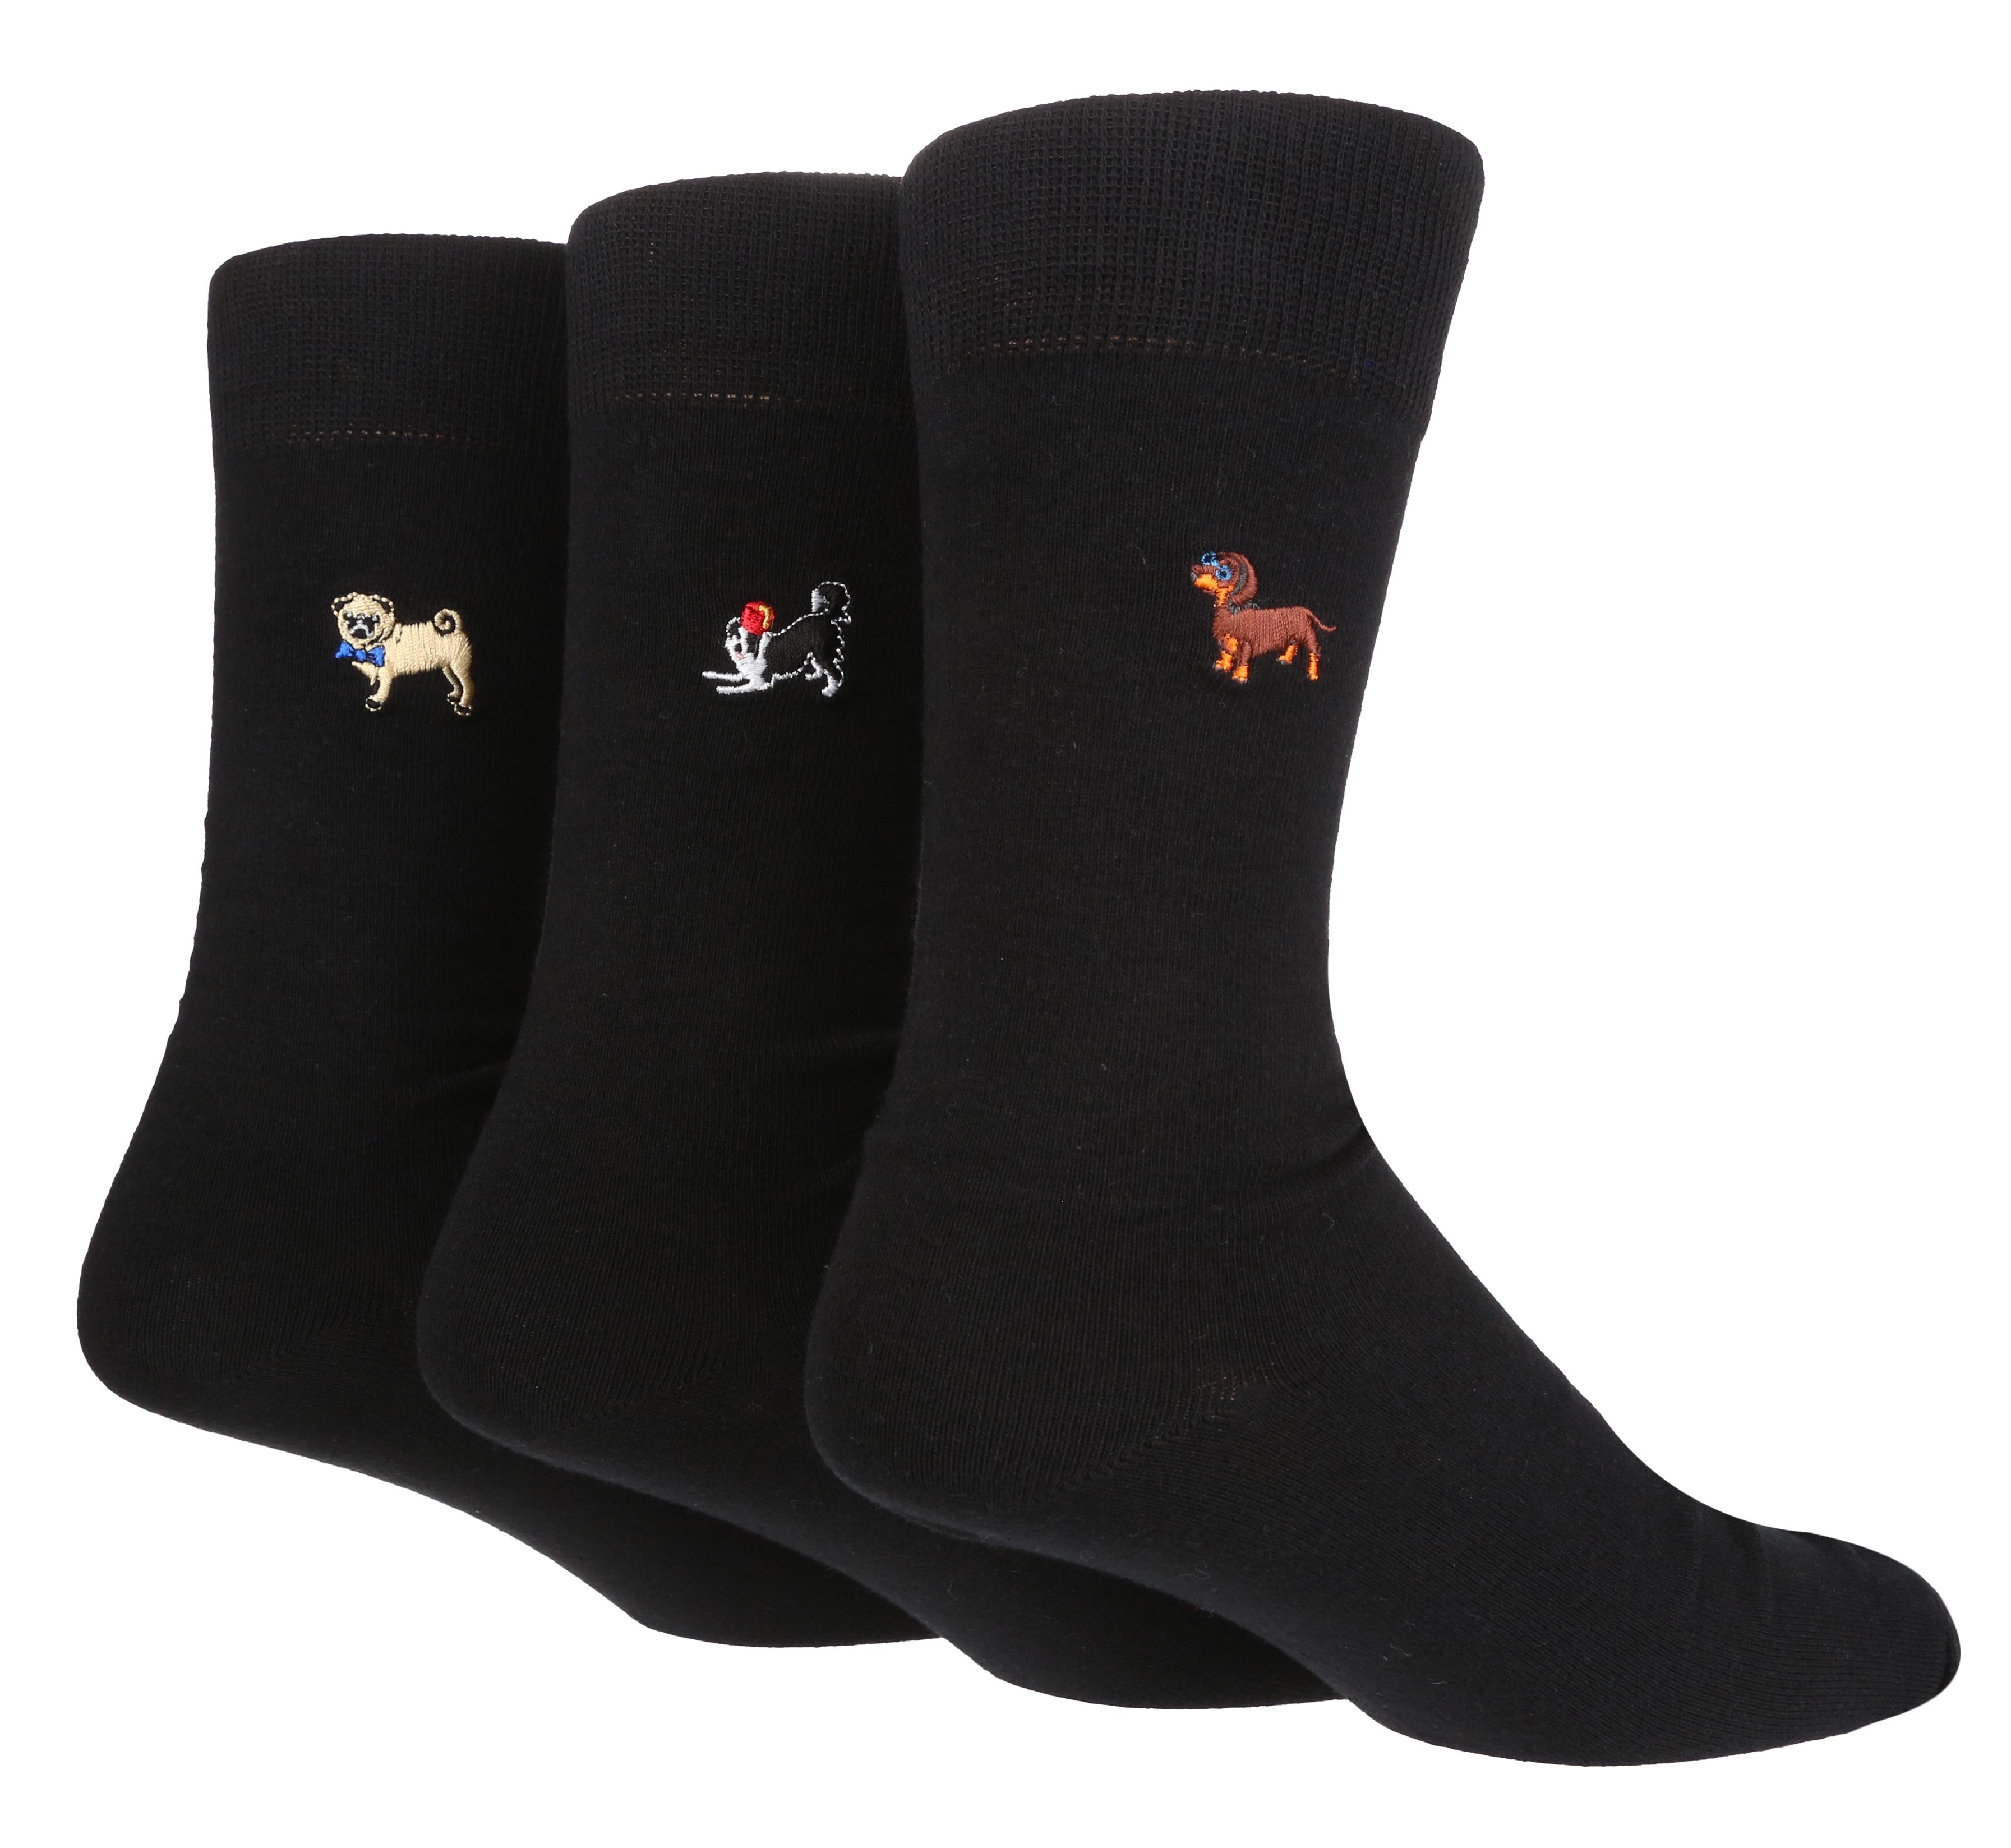 WILDFEET 3pk Embroided Cotton Novelty Crew - Mens 7-11